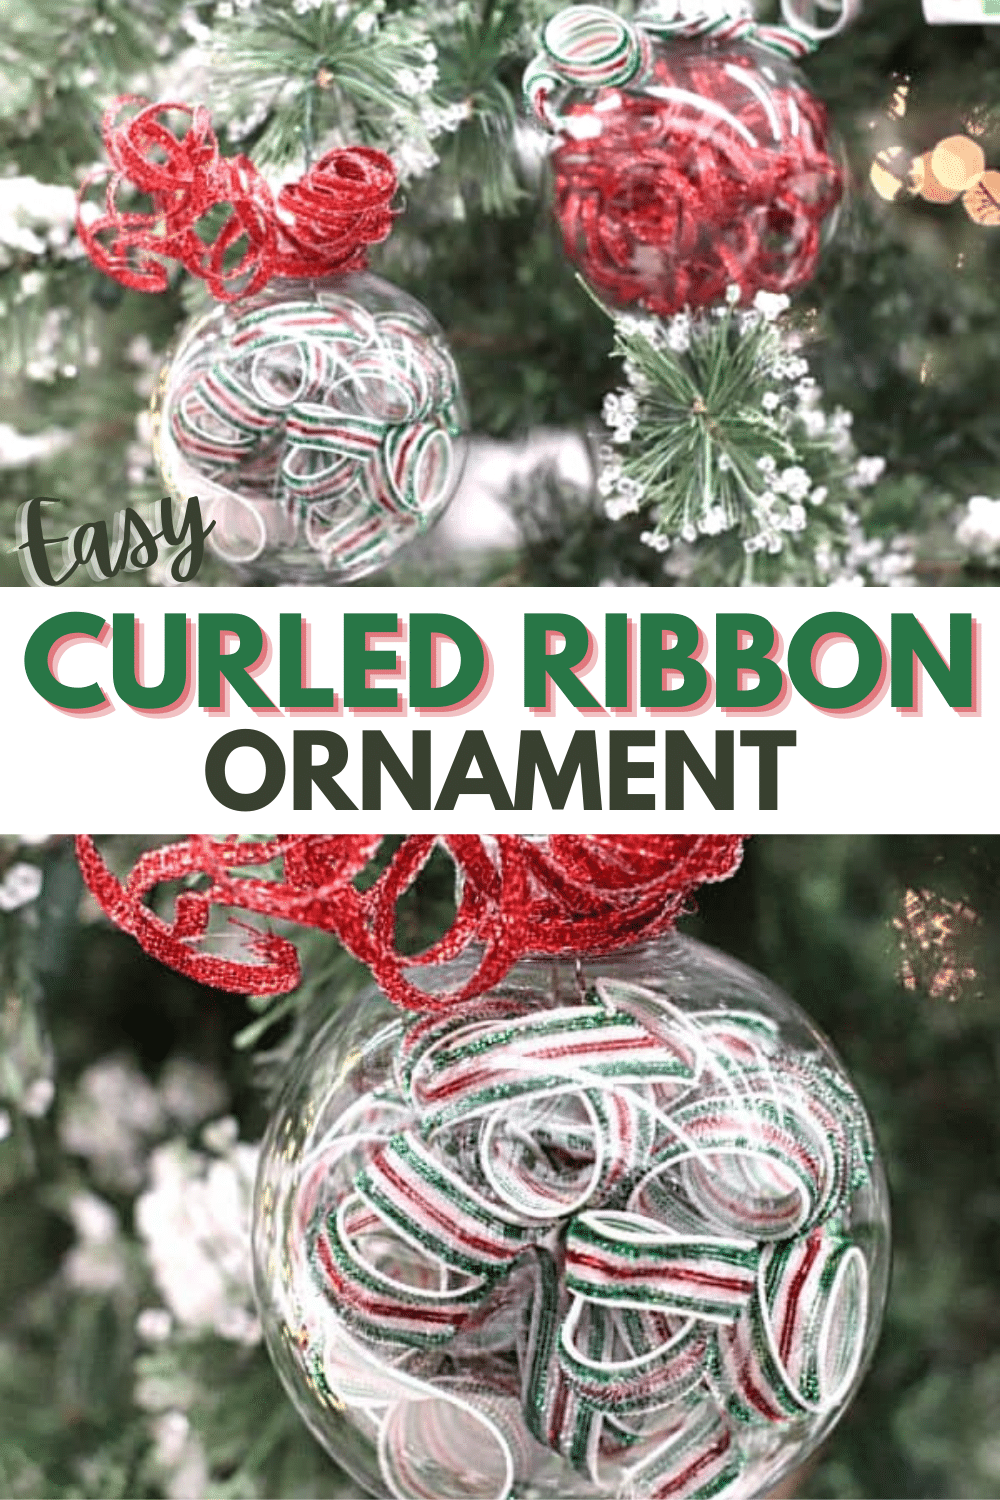 These curled ribbon ornaments are so festive and pretty, it's hard to believe they're so easy that you can make them in just minutes! #ornaments #christmas #diy via @wondermomwannab